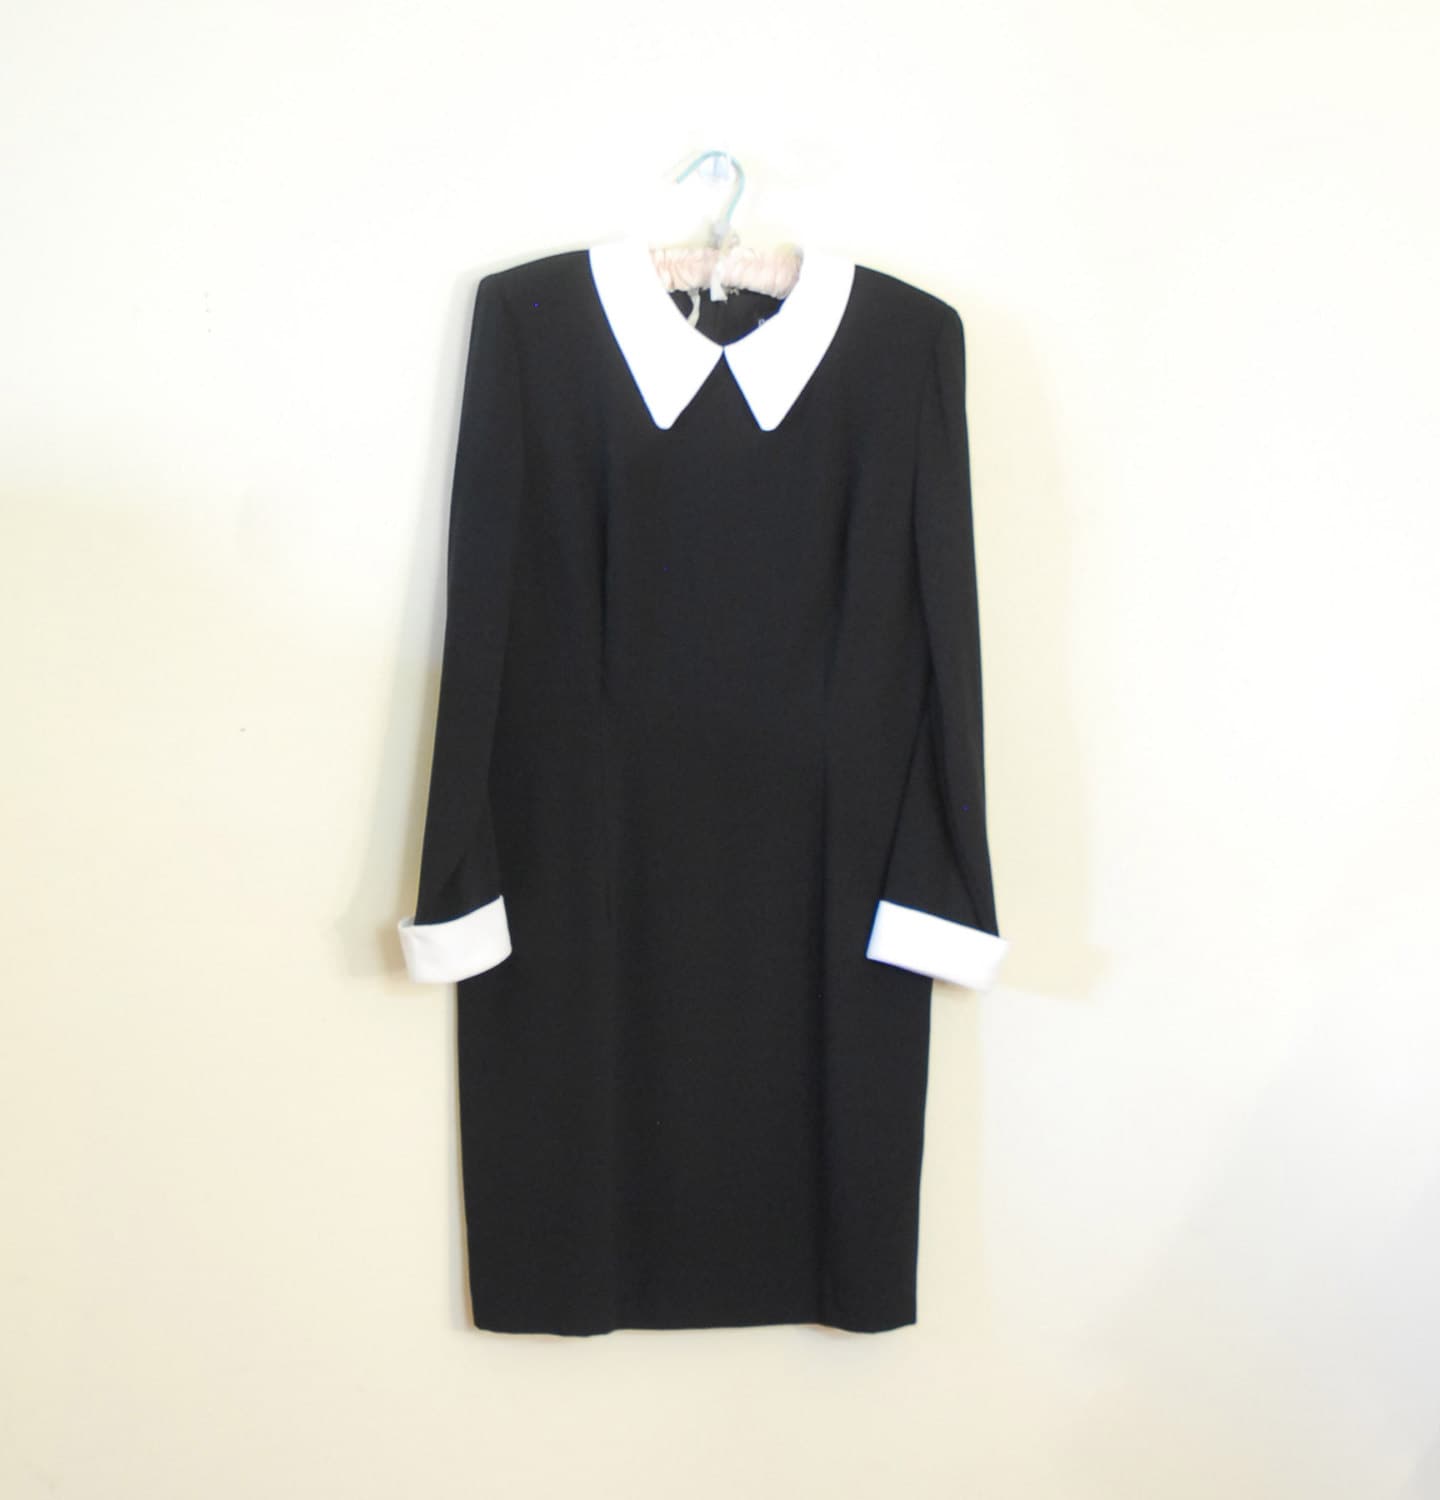 Long Sleeved Black  Dress  with White  Collar  and Cuffs  1980s